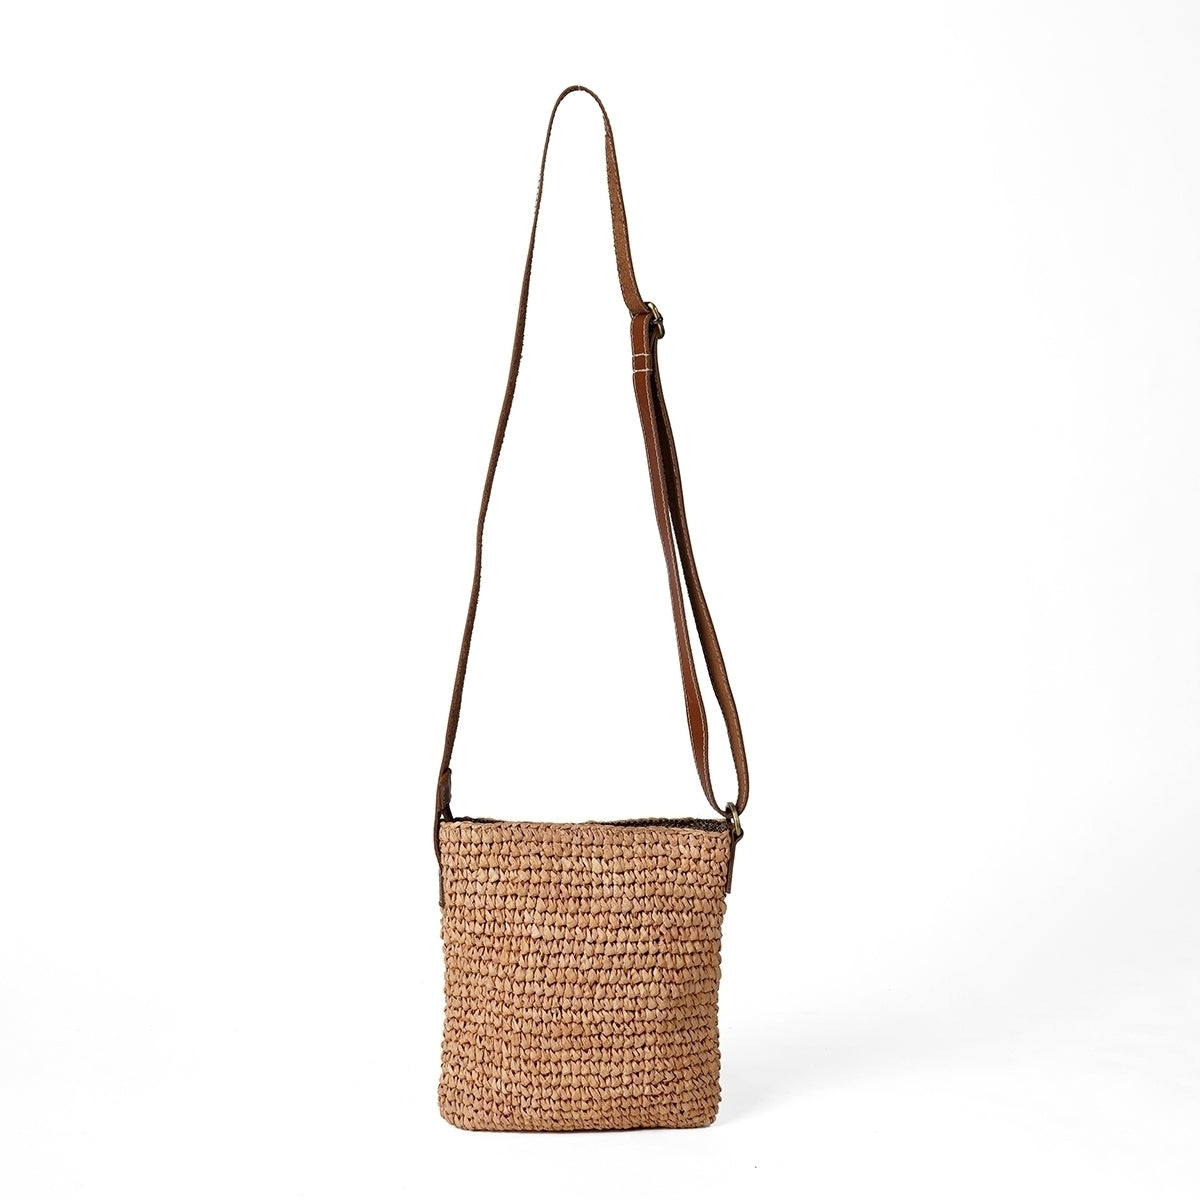 Natural colour Rafia/straw sling bag with adjustable leather handle